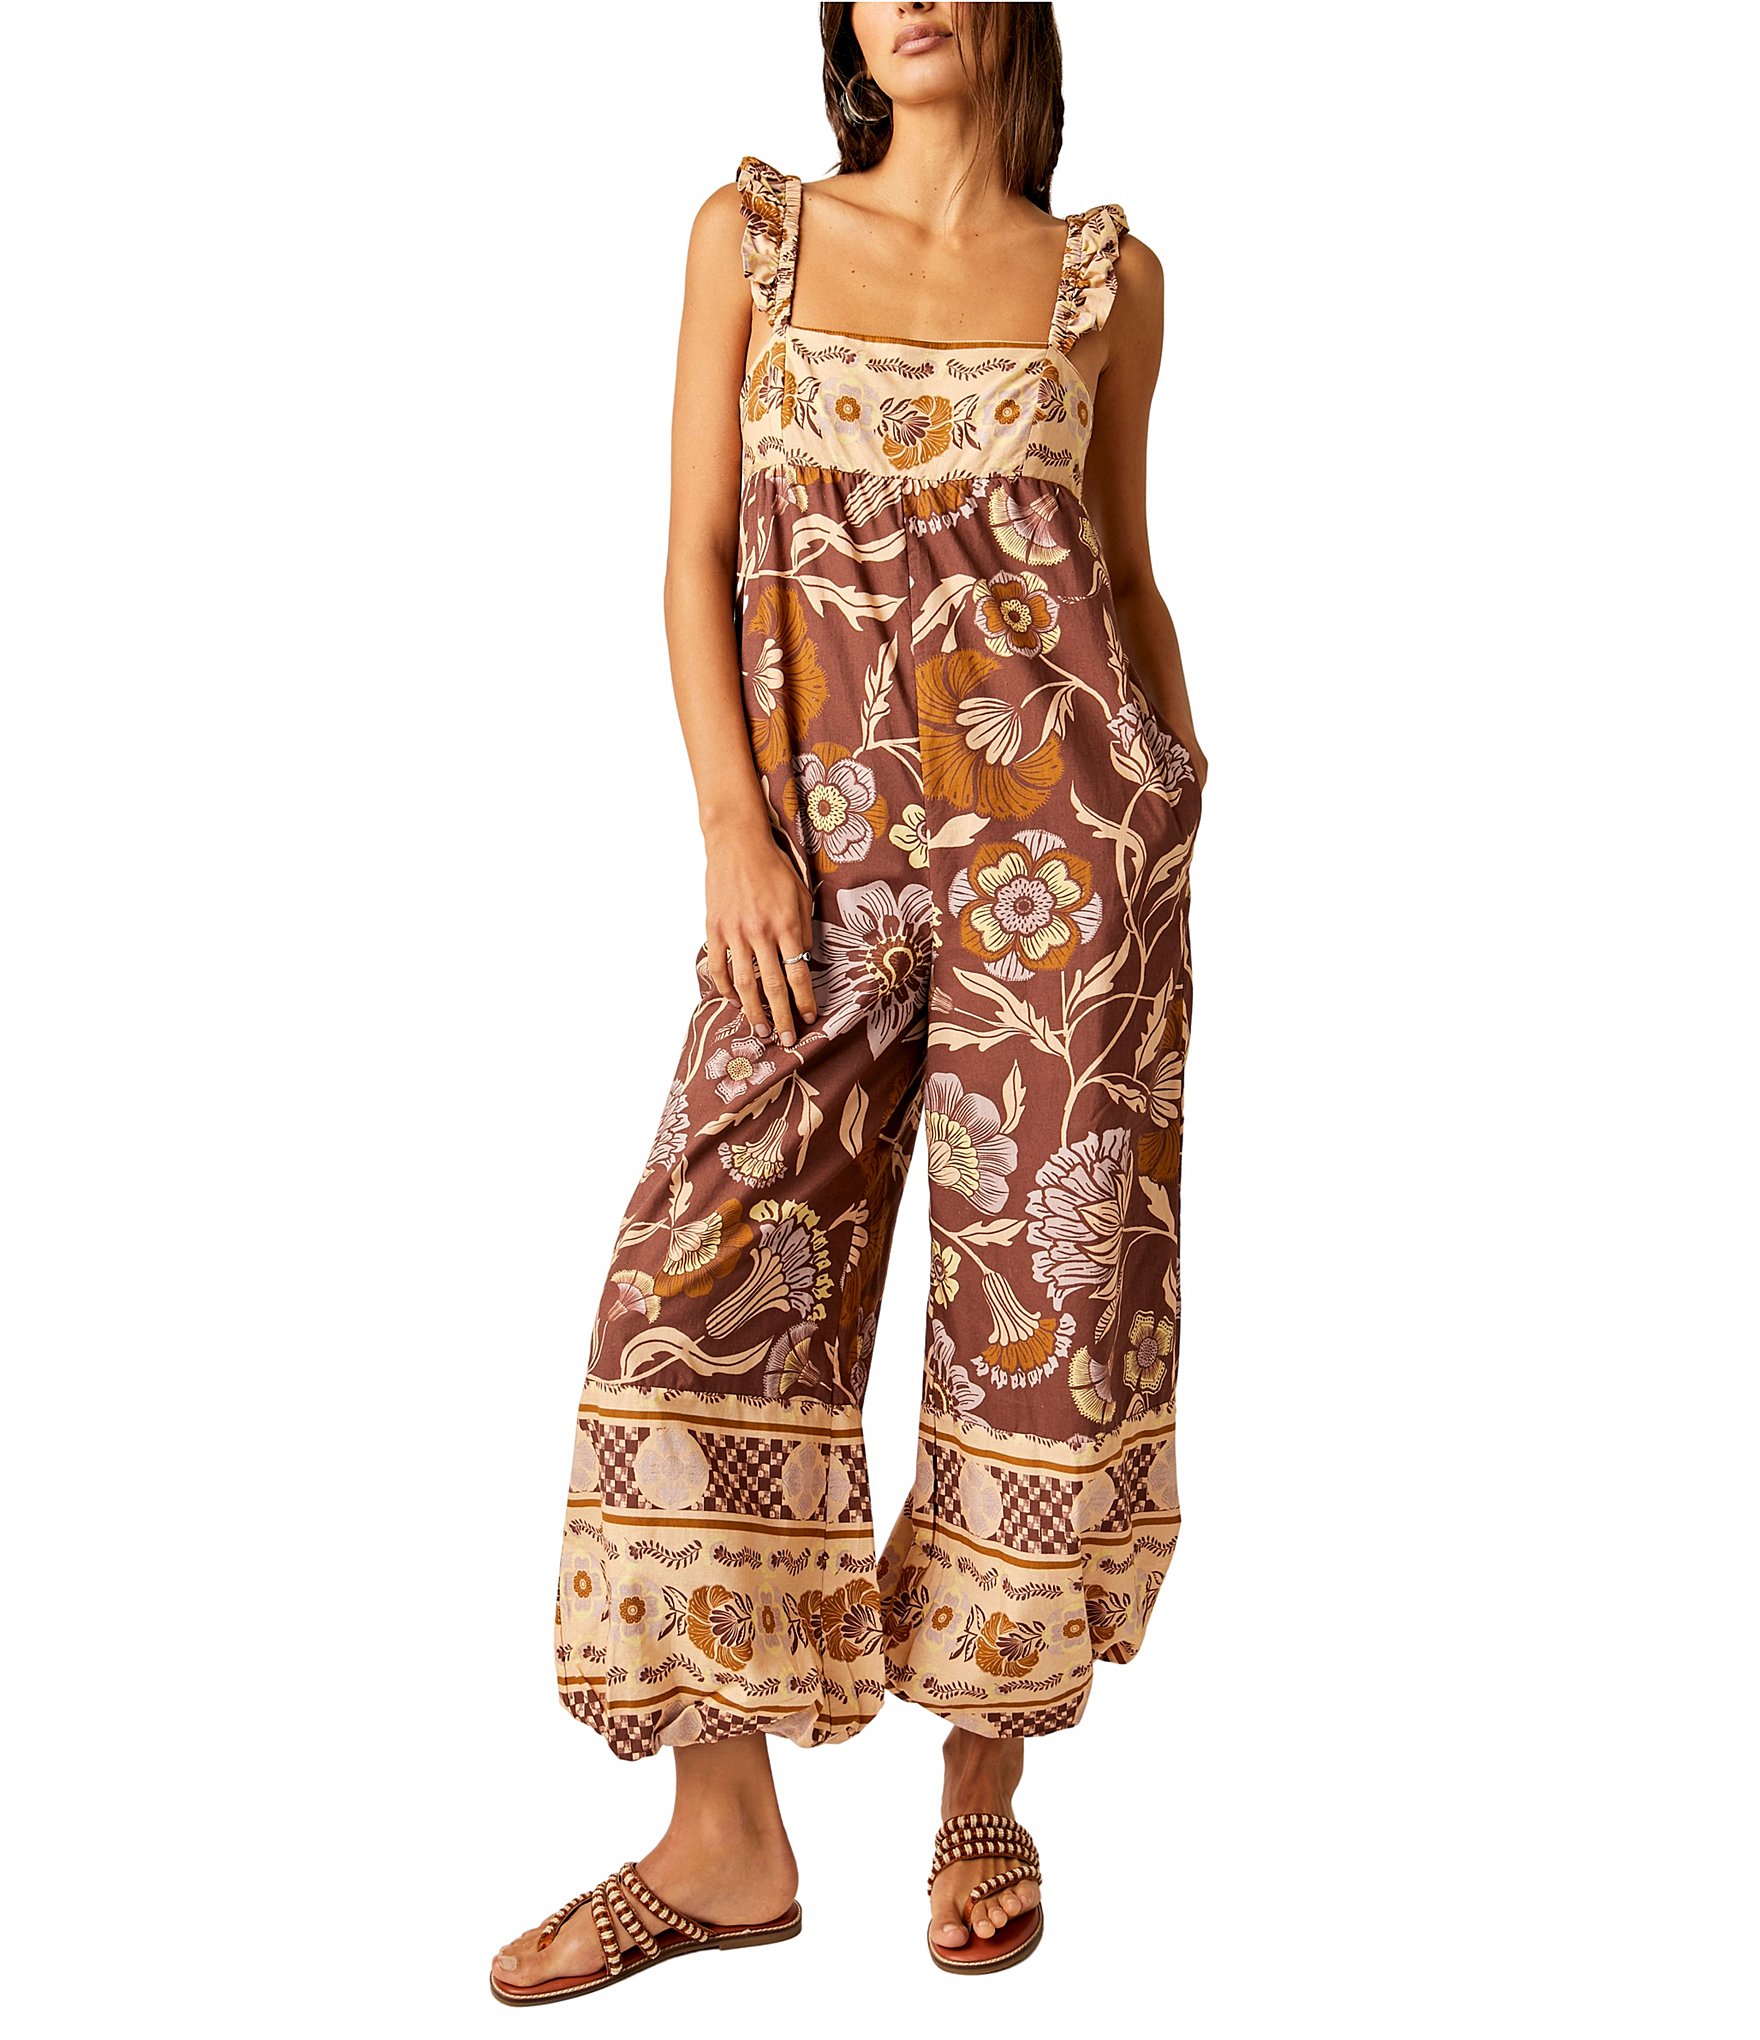 Free People Women's Jumpsuits & Rompers